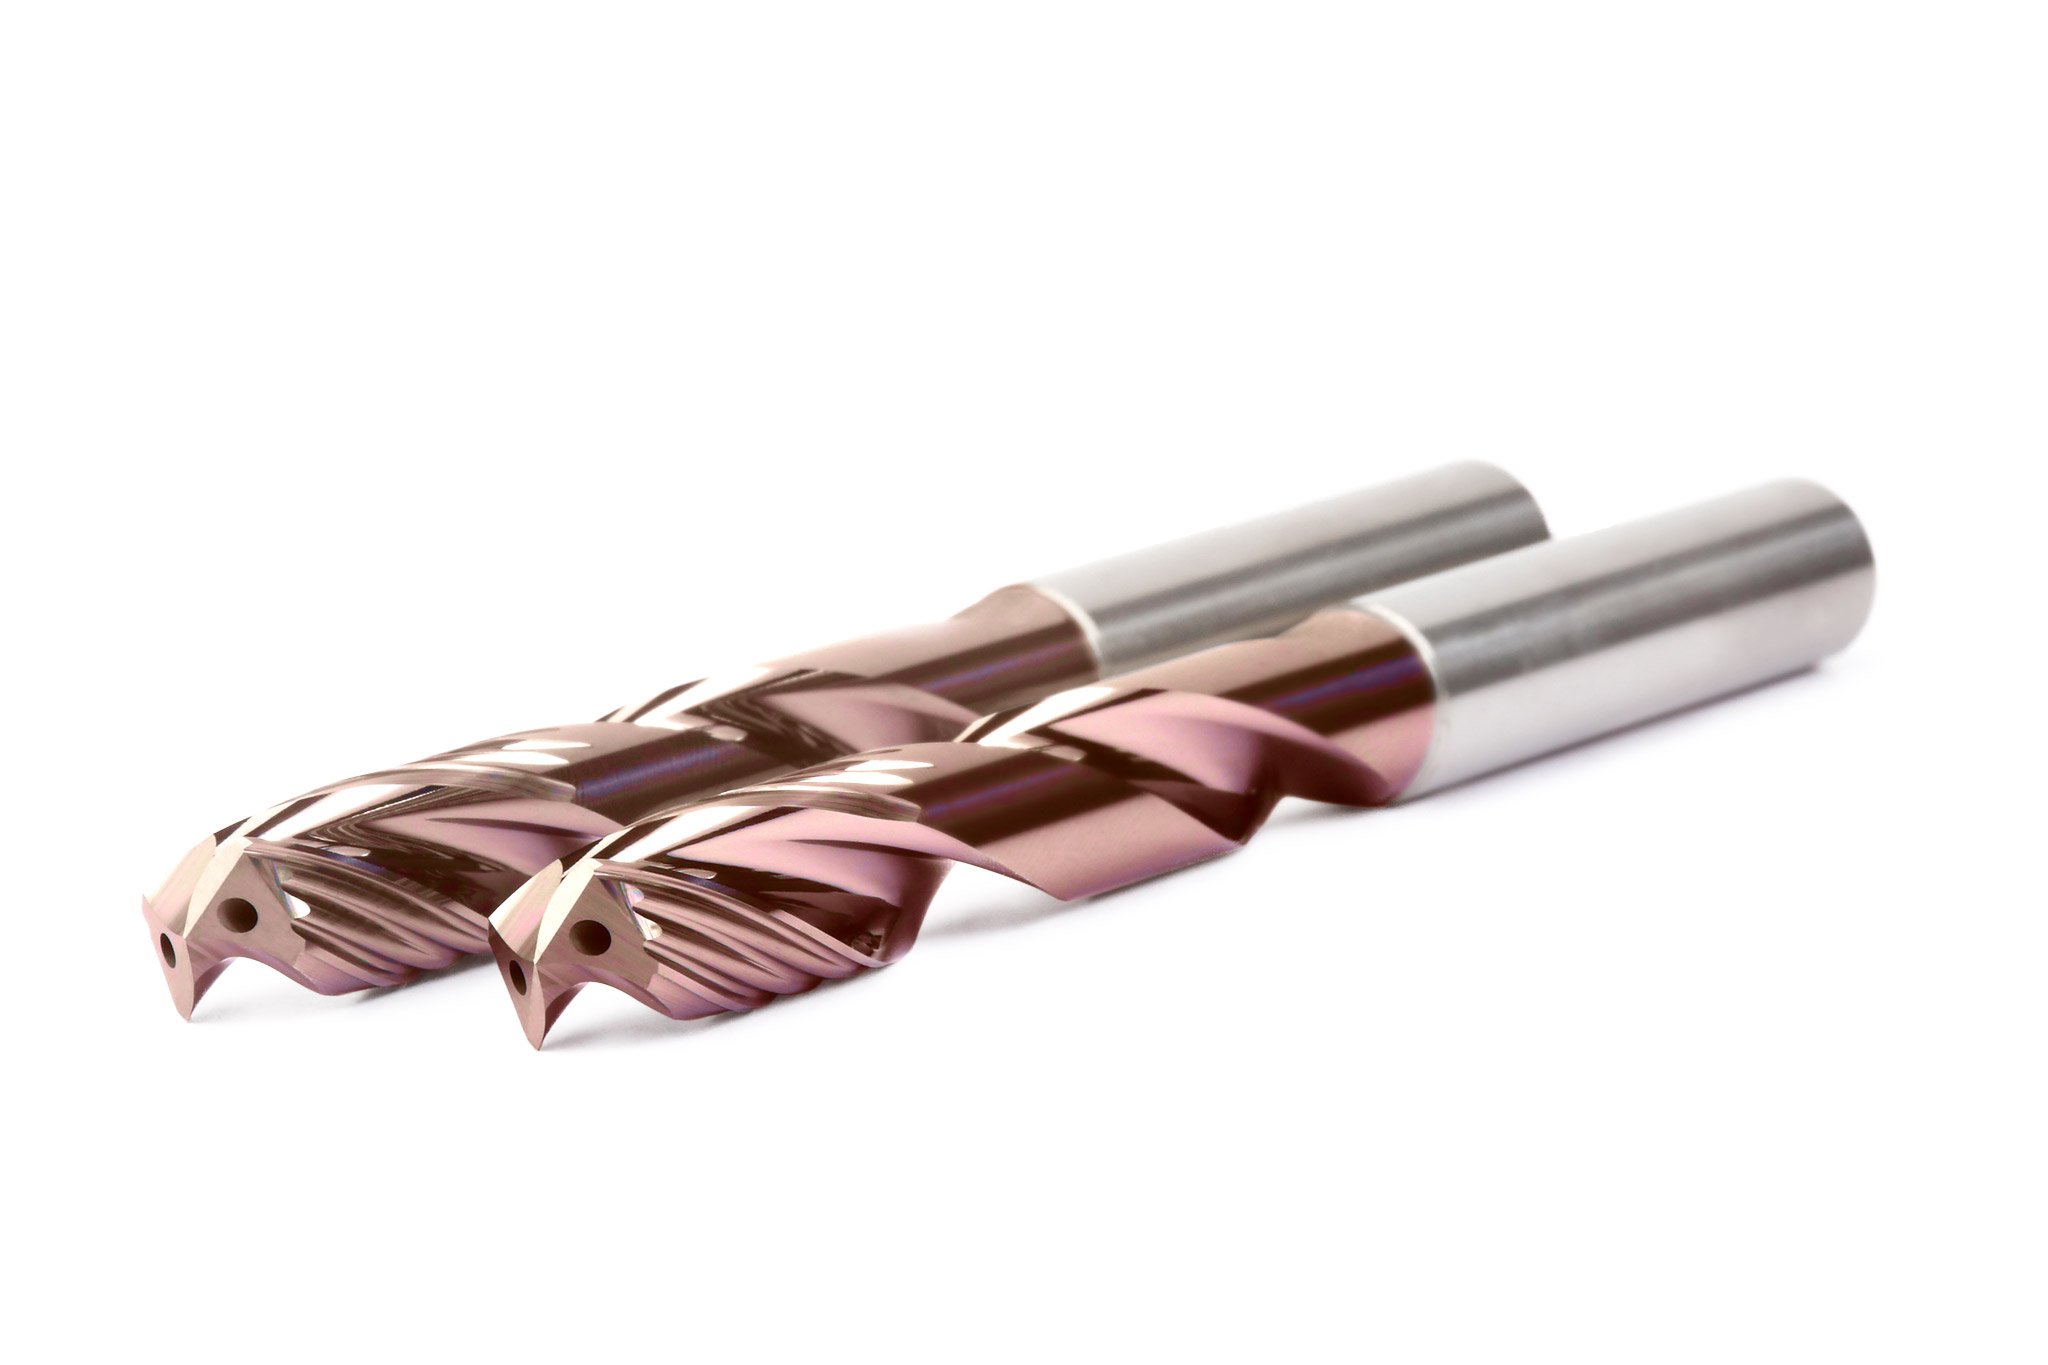 Two MEGA-Speed-Drill Titanium solid carbide drills from MAPAL for machining titanium